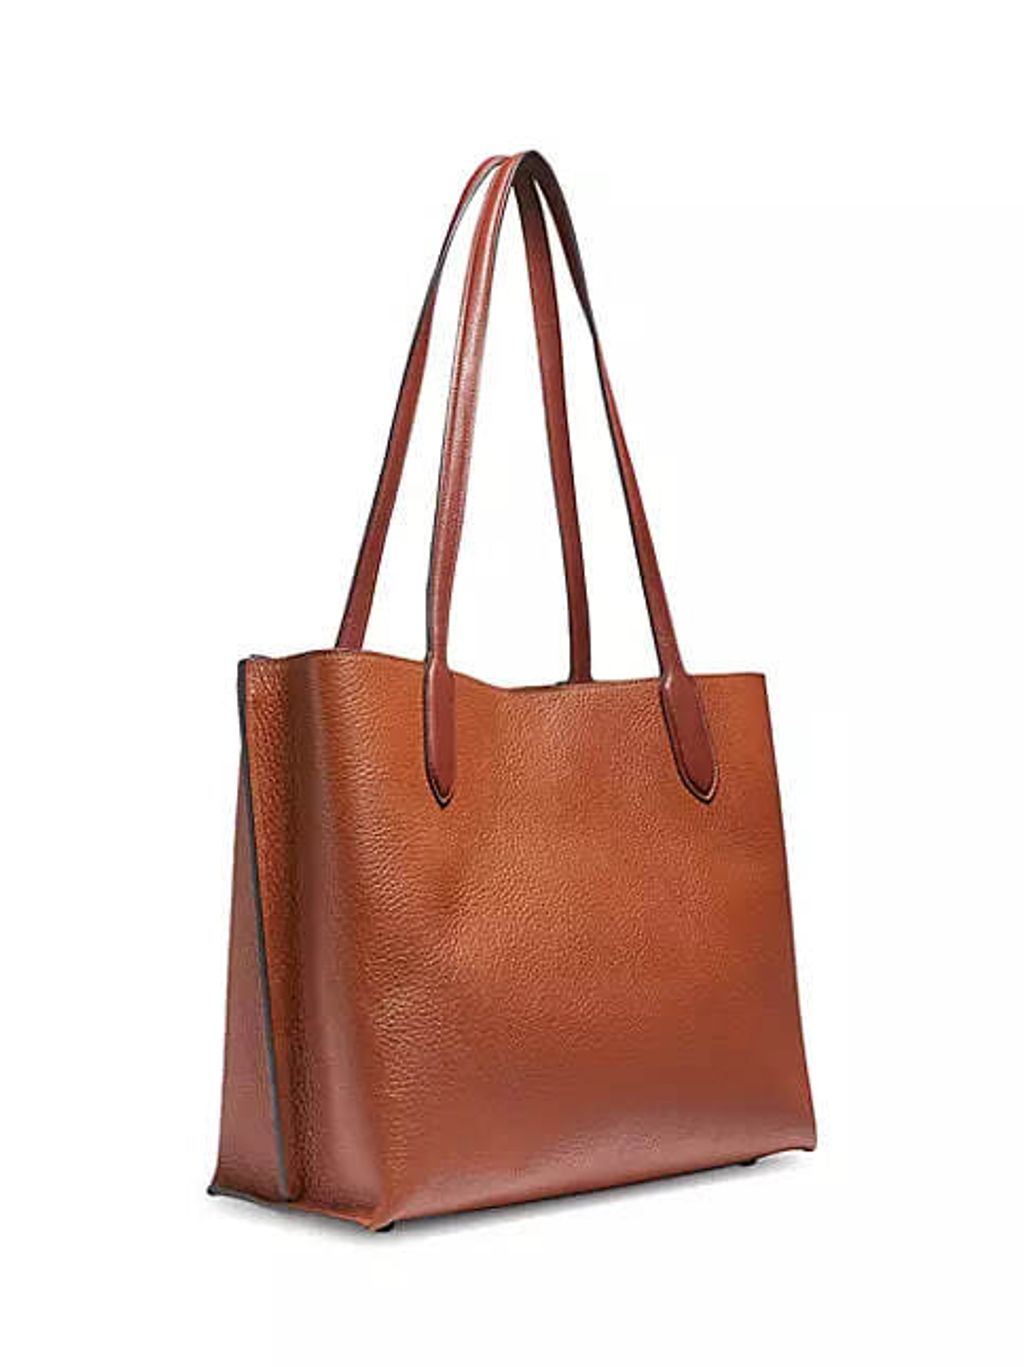 handbagbranded.com getlush outlet personalshopper usa malaysia ready stock coach malaysia Coach Willow Colorblock Leather 3